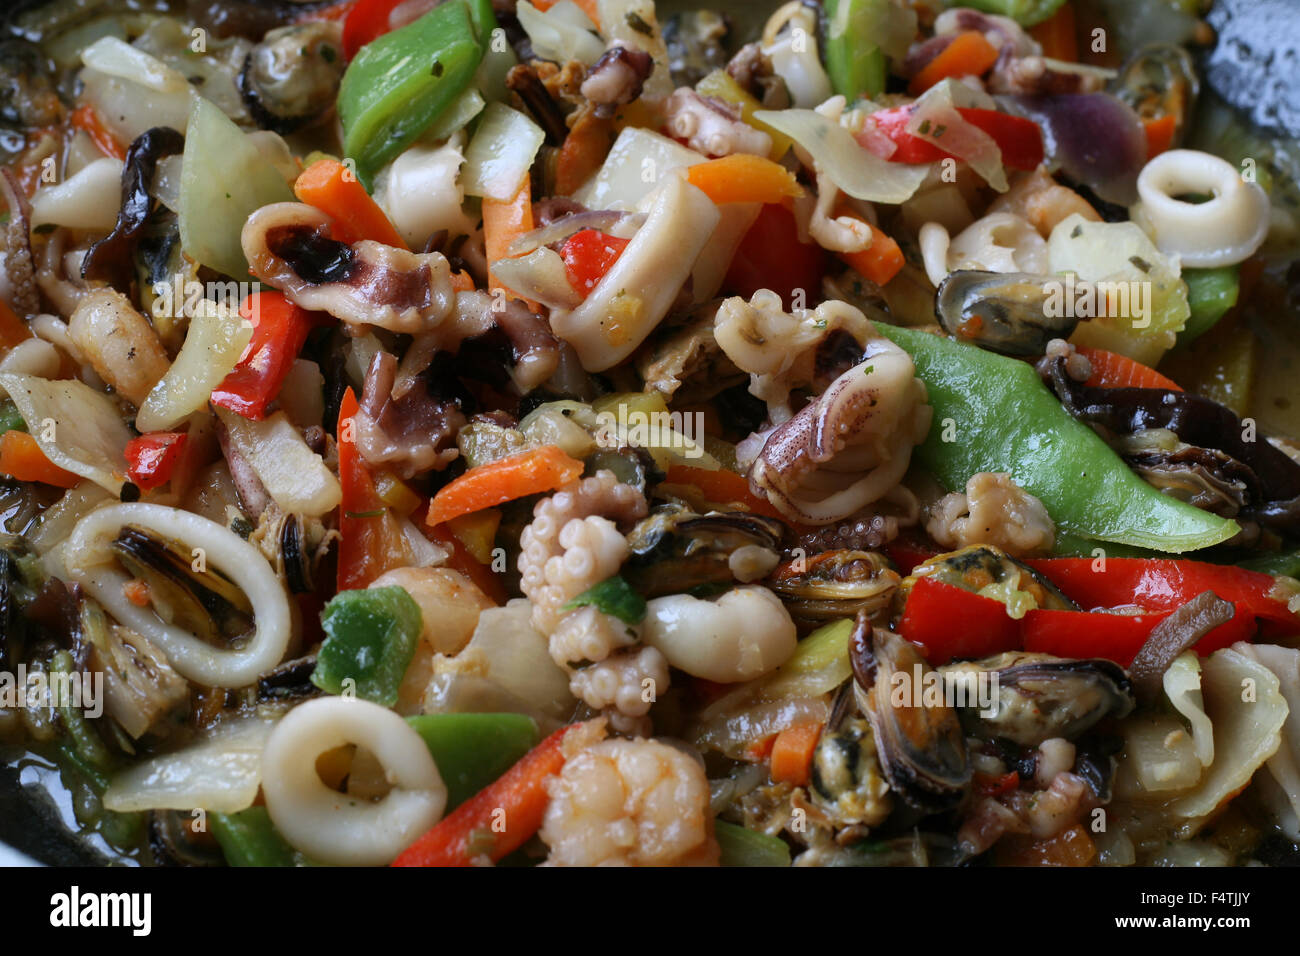 Seafood with vegetables stewed on frying pan Stock Photo